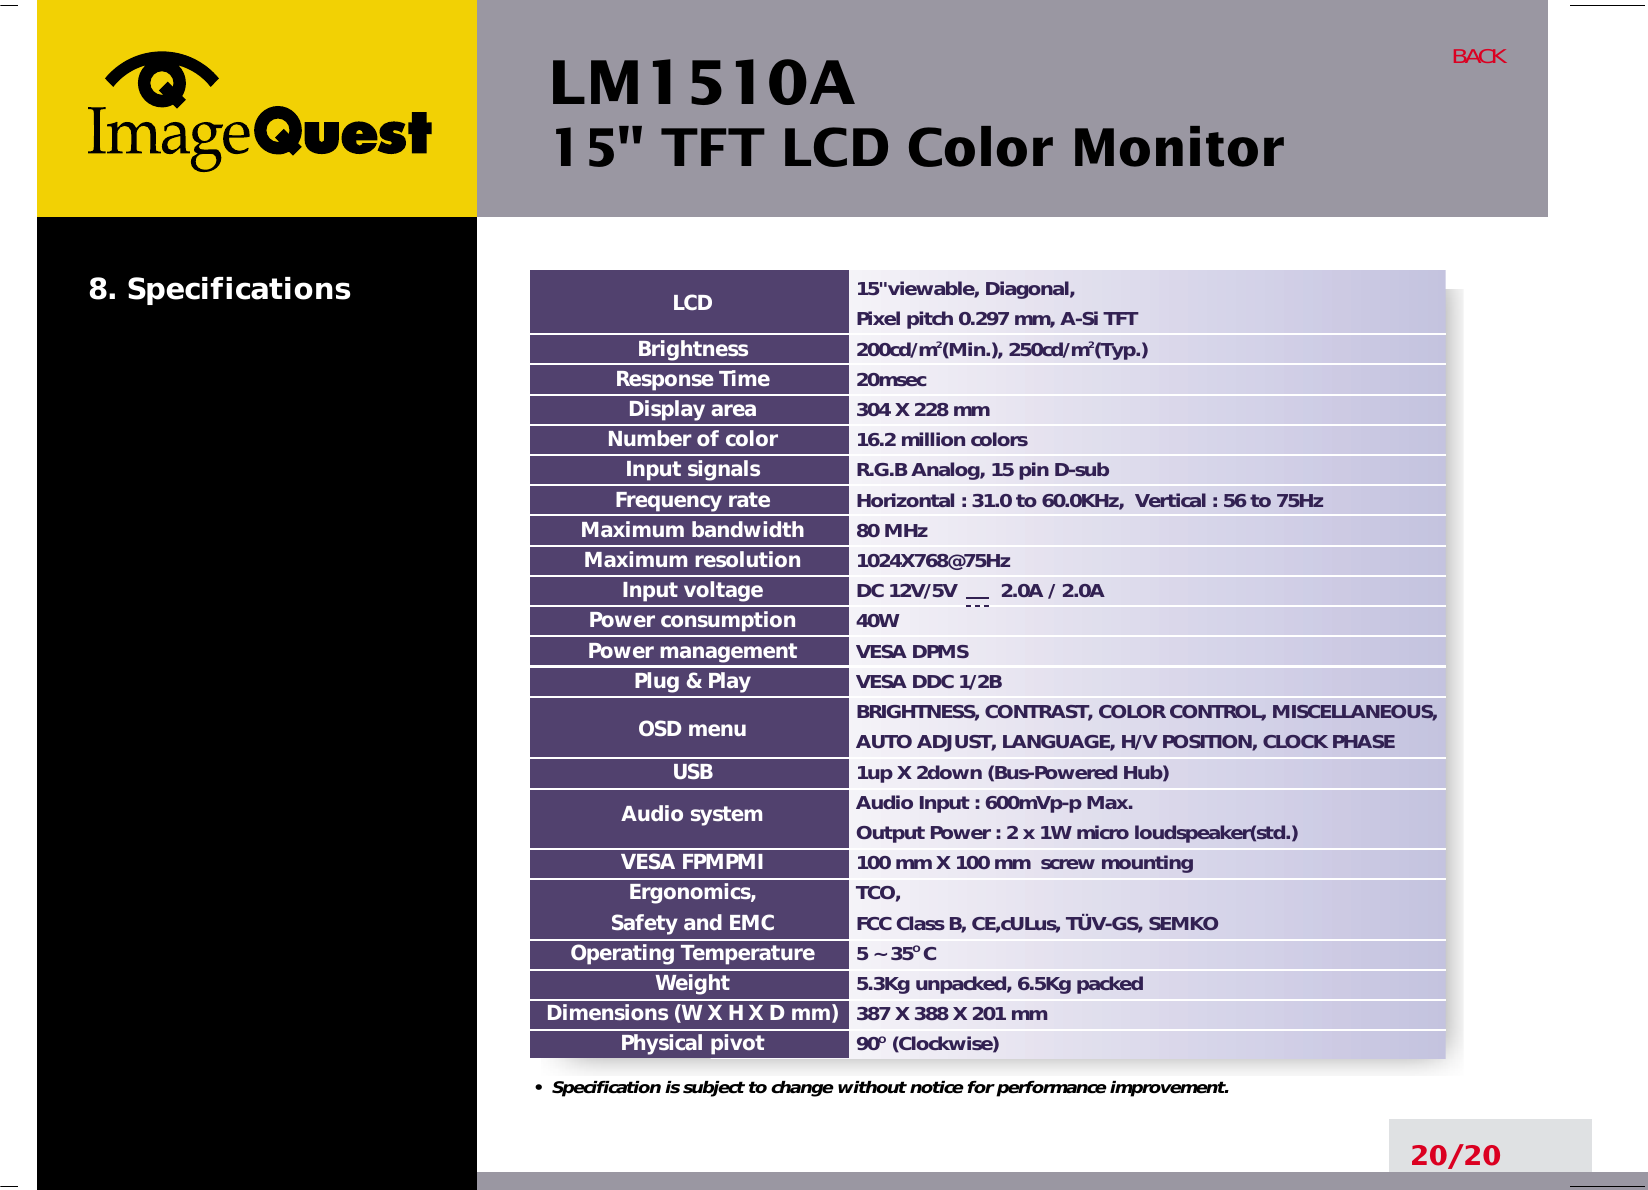 LM1510A15&quot; TFT LCD Color Monitor20/20BACK8. Specifications15&quot;viewable, Diagonal, Pixel pitch 0.297 mm, A-Si TFT200cd/m2(Min.), 250cd/m2(Typ.)20msec304 X 228 mm16.2 million colorsR.G.B Analog, 15 pin D-subHorizontal : 31.0 to 60.0KHz,  Vertical : 56 to 75Hz80 MHz1024X768@75HzDC 12V/5V        2.0A / 2.0A40WVESA DPMSVESA DDC 1/2BBRIGHTNESS, CONTRAST, COLOR CONTROL, MISCELLANEOUS,AUTO ADJUST, LANGUAGE, H/V POSITION, CLOCK PHASE1up X 2down (Bus-Powered Hub)Audio Input : 600mVp-p Max.Output Power : 2 x 1W micro loudspeaker(std.)100 mm X 100 mm  screw mountingTCO, FCC Class B, CE,cULus, TÜV-GS, SEMKO5 ~ 35O C5.3Kg unpacked, 6.5Kg packed387 X 388 X 201 mm90O(Clockwise)LCDBrightnessResponse TimeDisplay areaNumber of colorInput signalsFrequency rateMaximum bandwidthMaximum resolutionInput voltagePower consumptionPower managementPlug &amp; PlayOSD menuUSBAudio systemVESA FPMPMIErgonomics,Safety and EMCOperating TemperatureWeightDimensions (W X H X D mm)Physical pivot•  Specification is subject to change without notice for performance improvement.